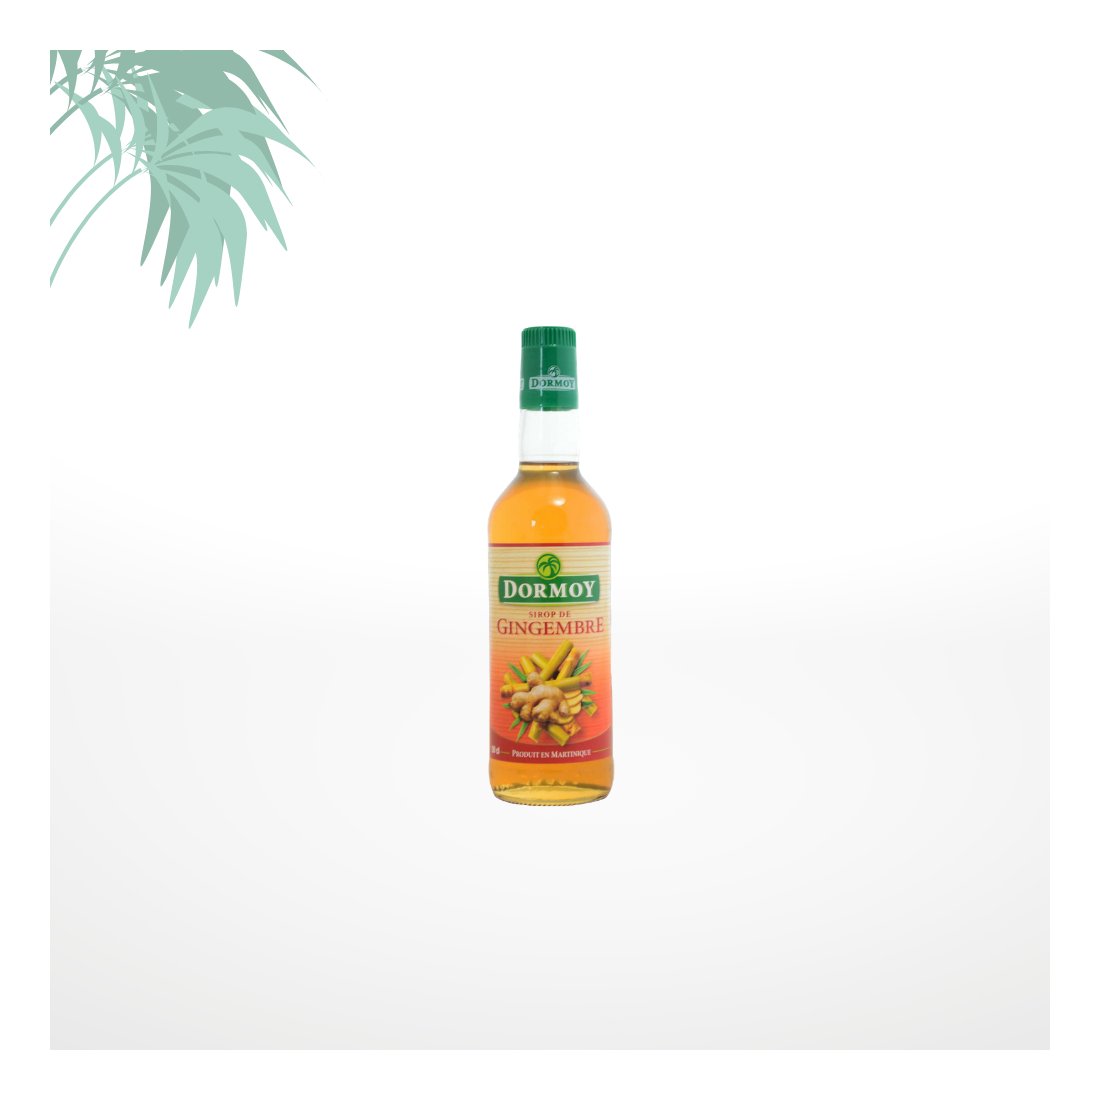 Sirop de gingembre - Epicerie - Guadeloupe Forever